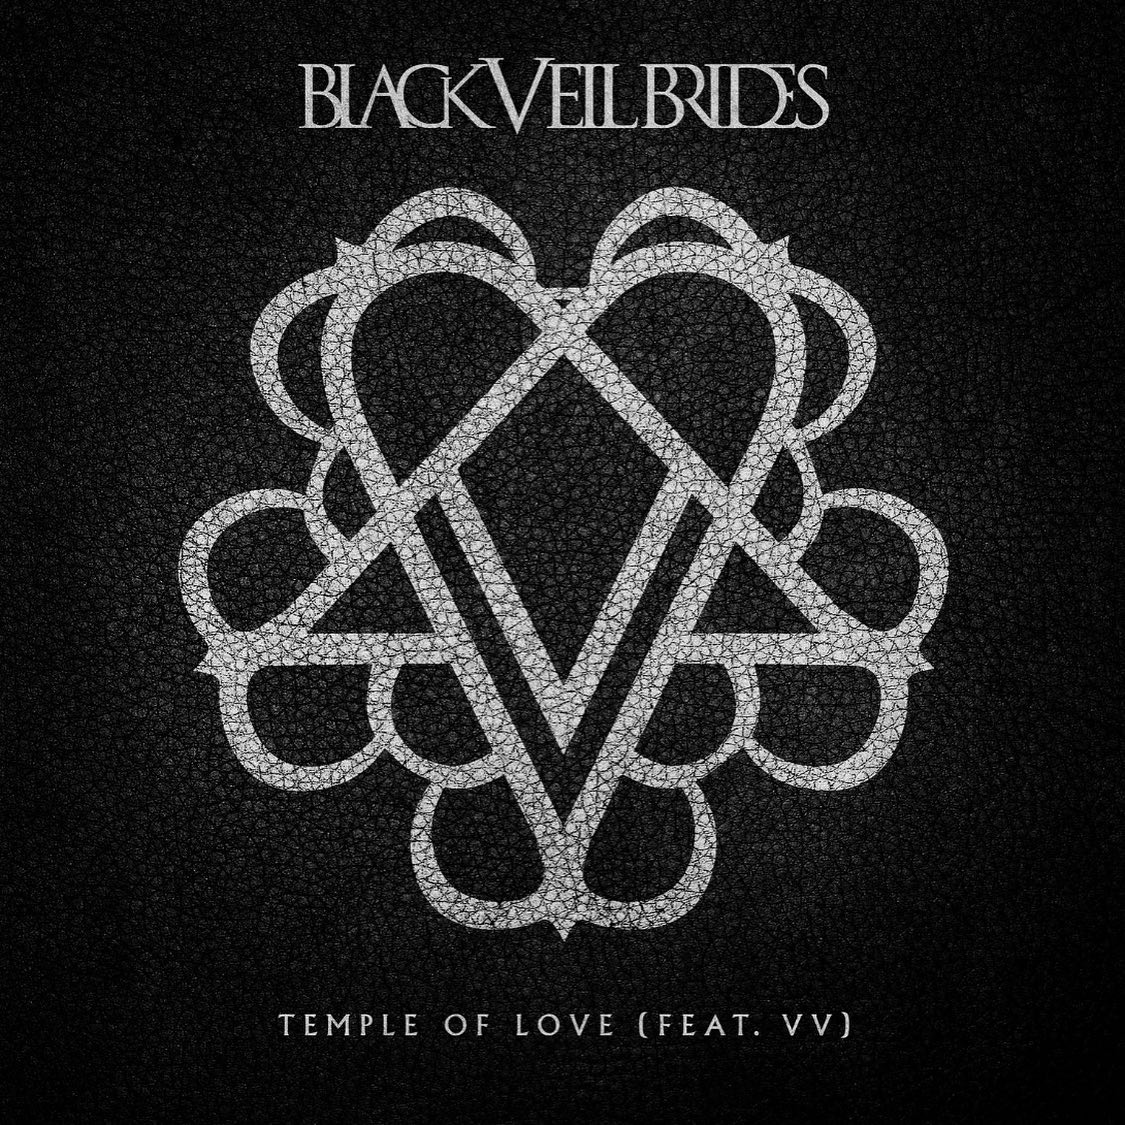 HOT TRACK: “Temple of Love” by Black Veil Brides featuring VV